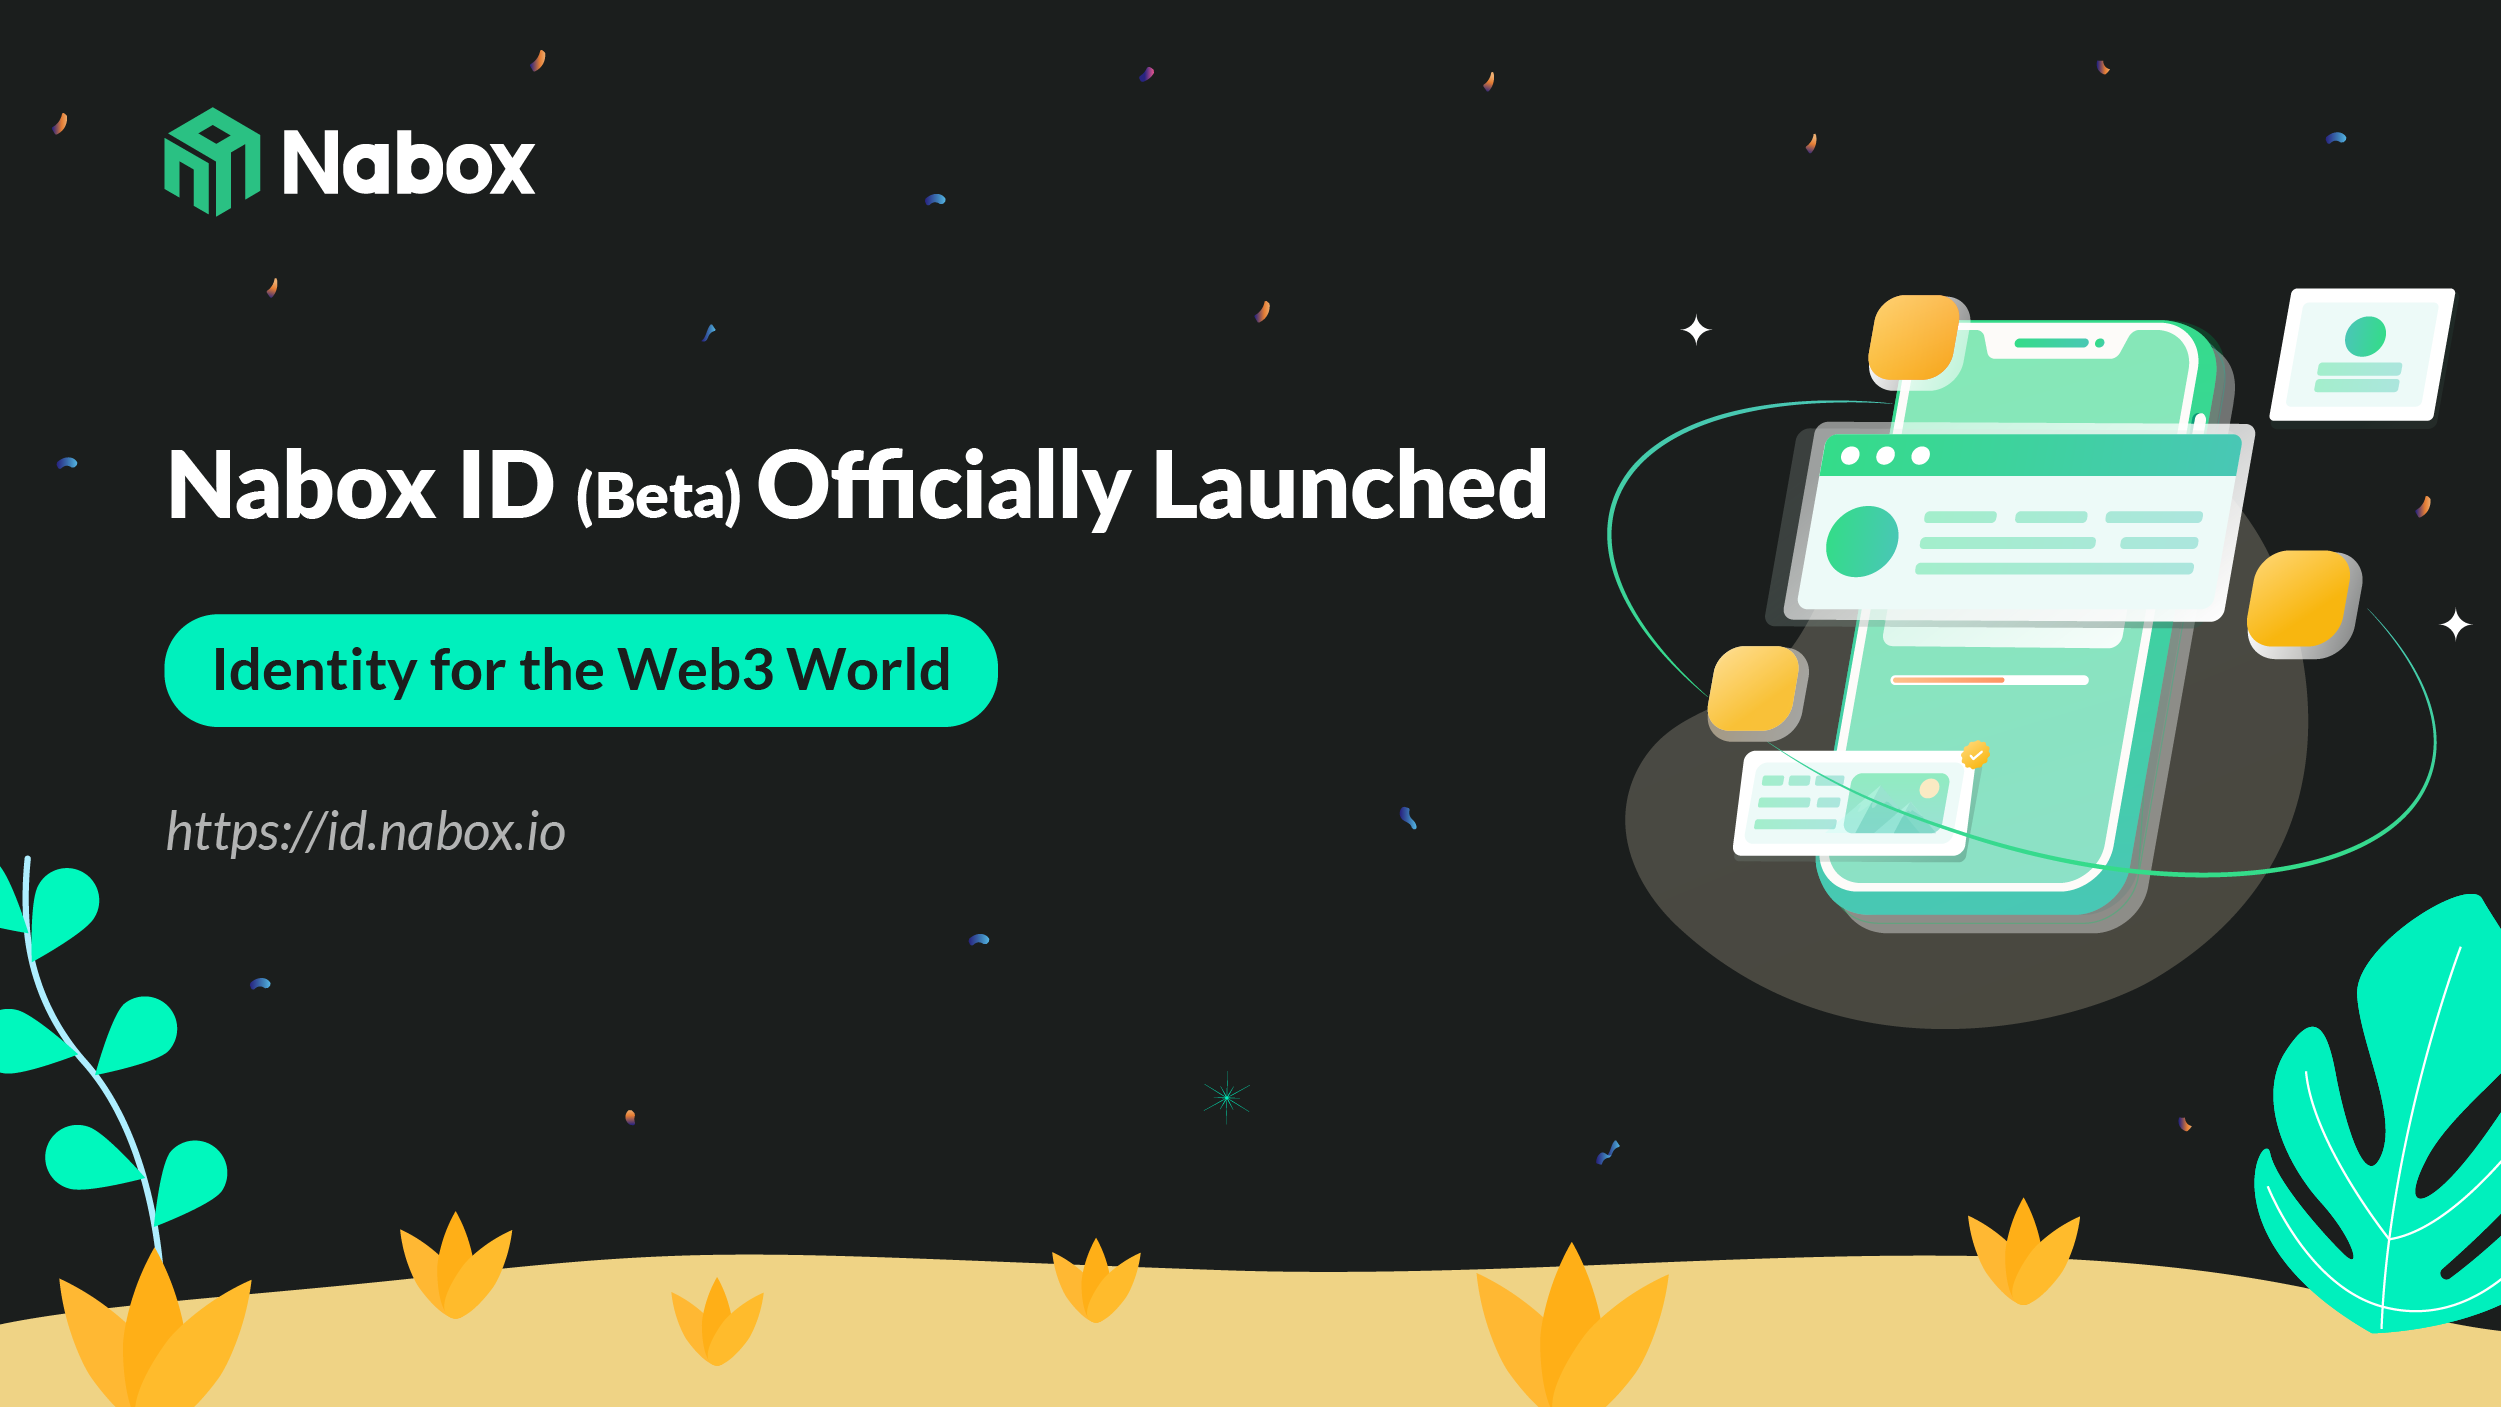 Nabox ID (Beta) Officially Launched: Identity for the Web3 World